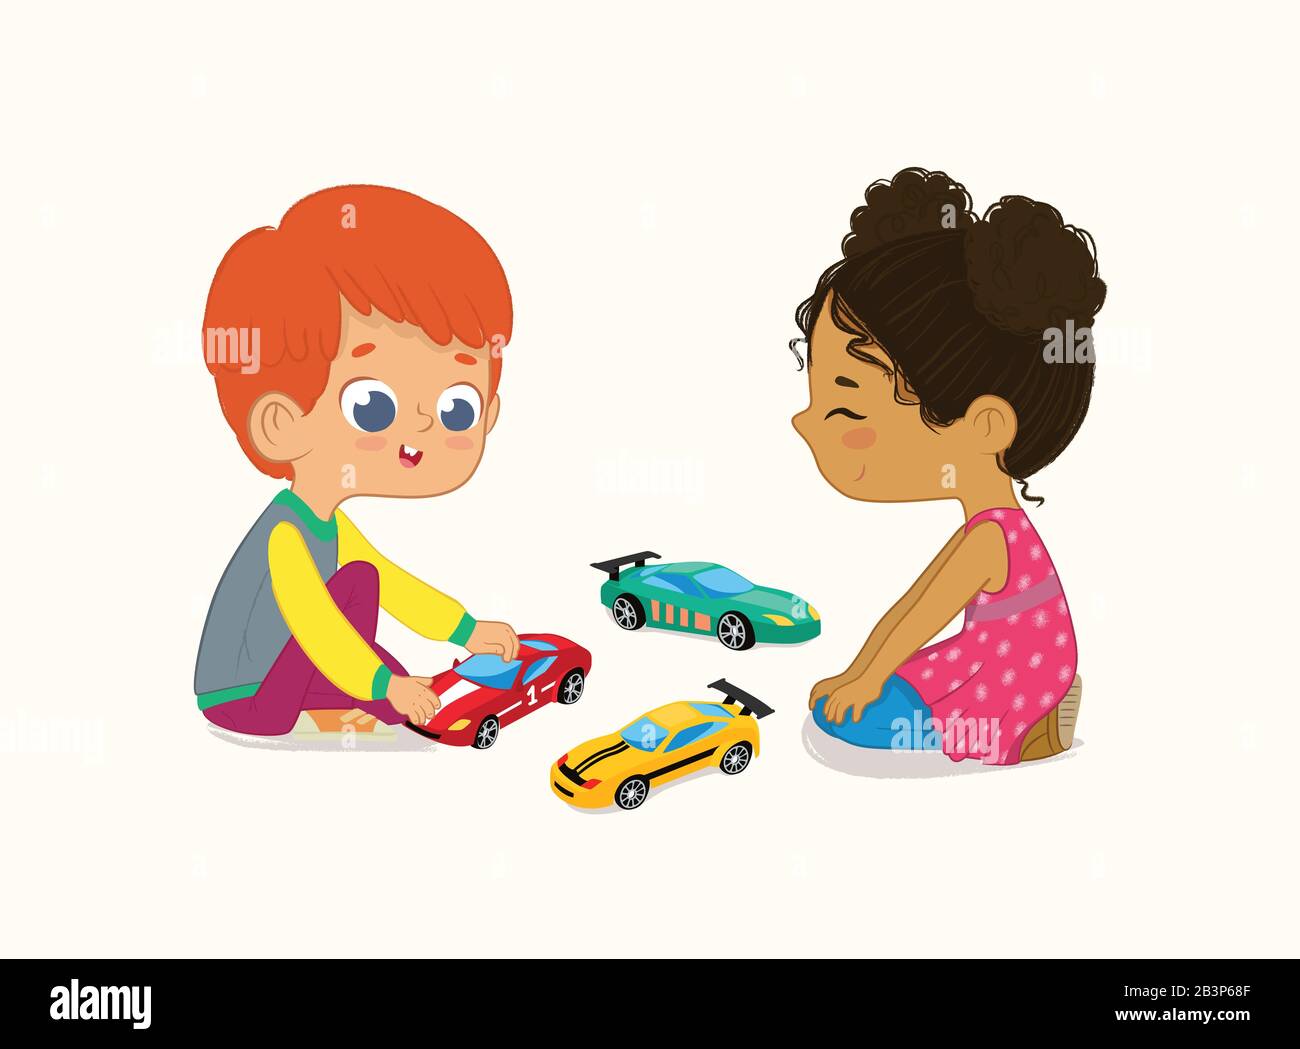 Illustration of Cute Boy and Girl Playing with Their Toys Cars. Red hair boy shows and shares his Toy Cars to His African-American Friend Stock Vector